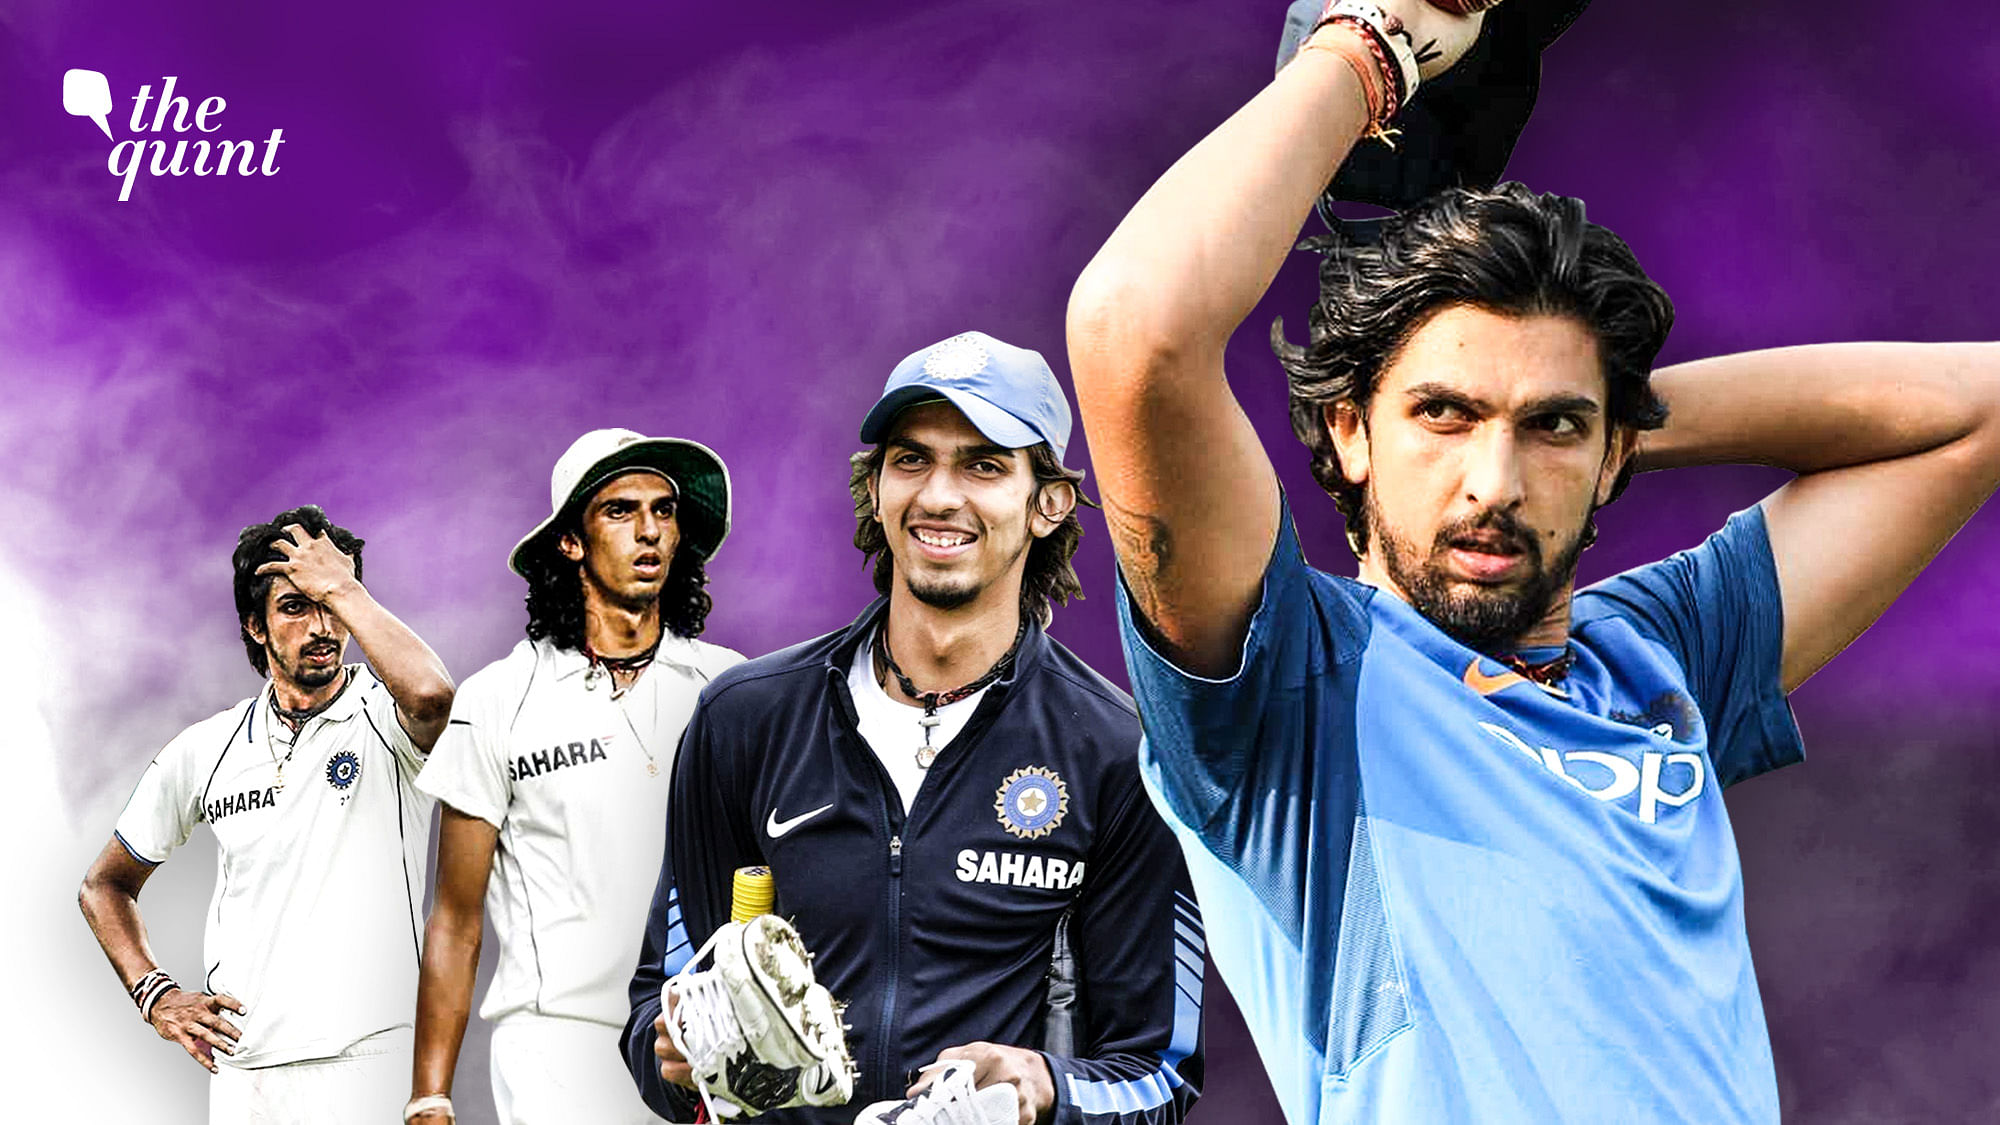 In South African conditions, Ishant Sharma is the most experience Indian cricketer, having previously toured the country twice before.